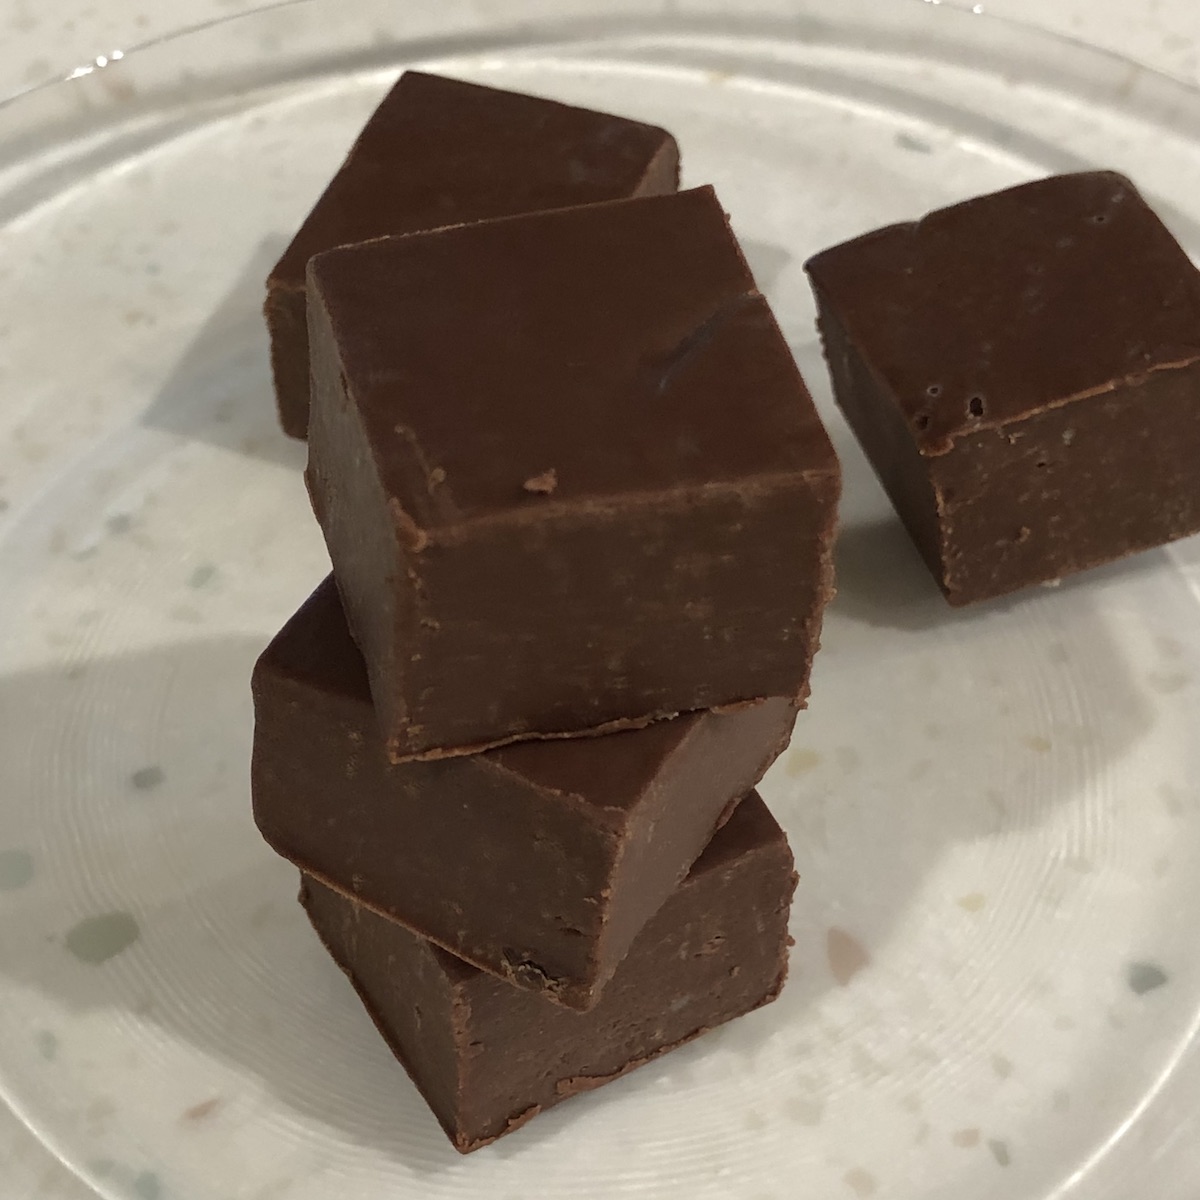 5 pieces fudge (3 stacked) on a clear plate